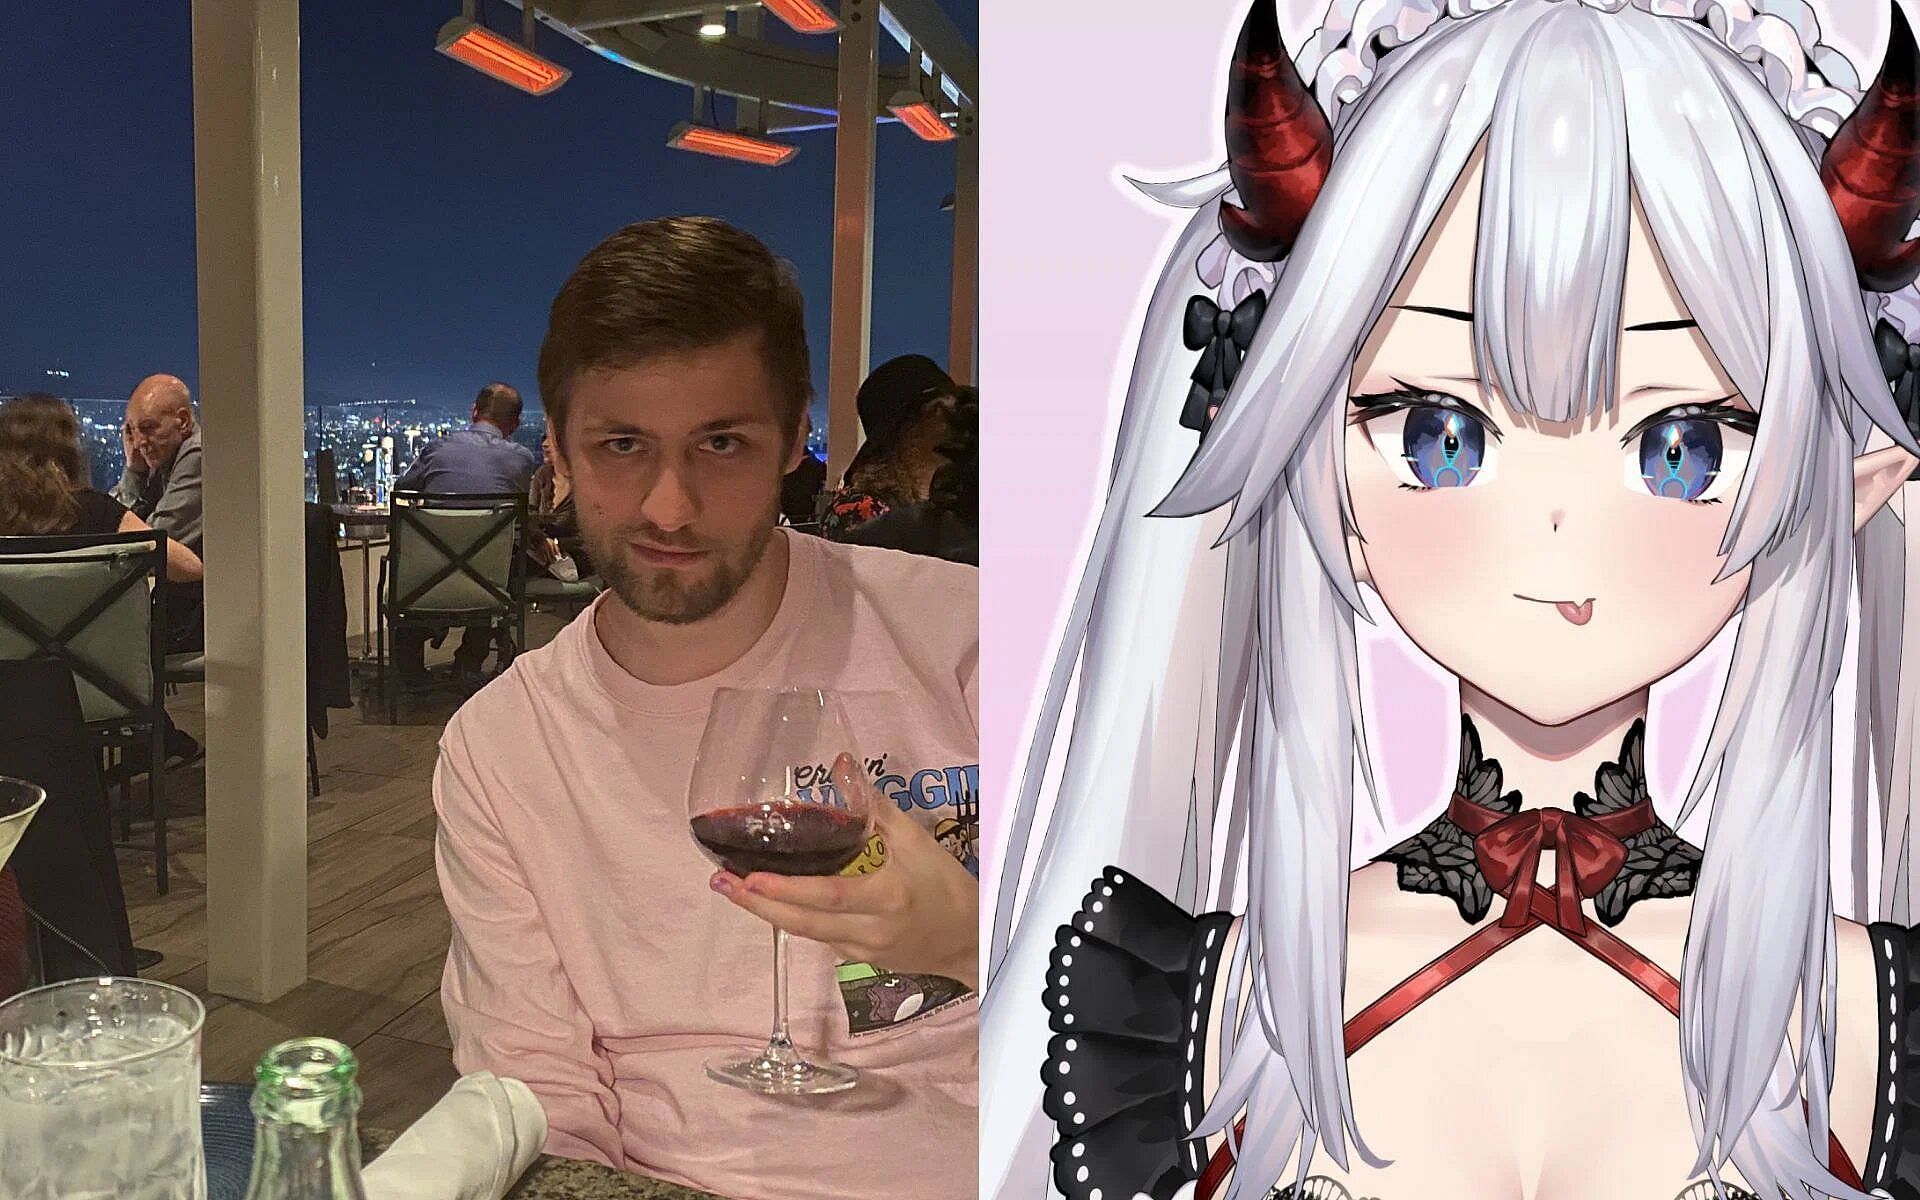 Sodapoppin and Veibae continue to be at the center of dating rumors yet again (Image via Sportskeeda)